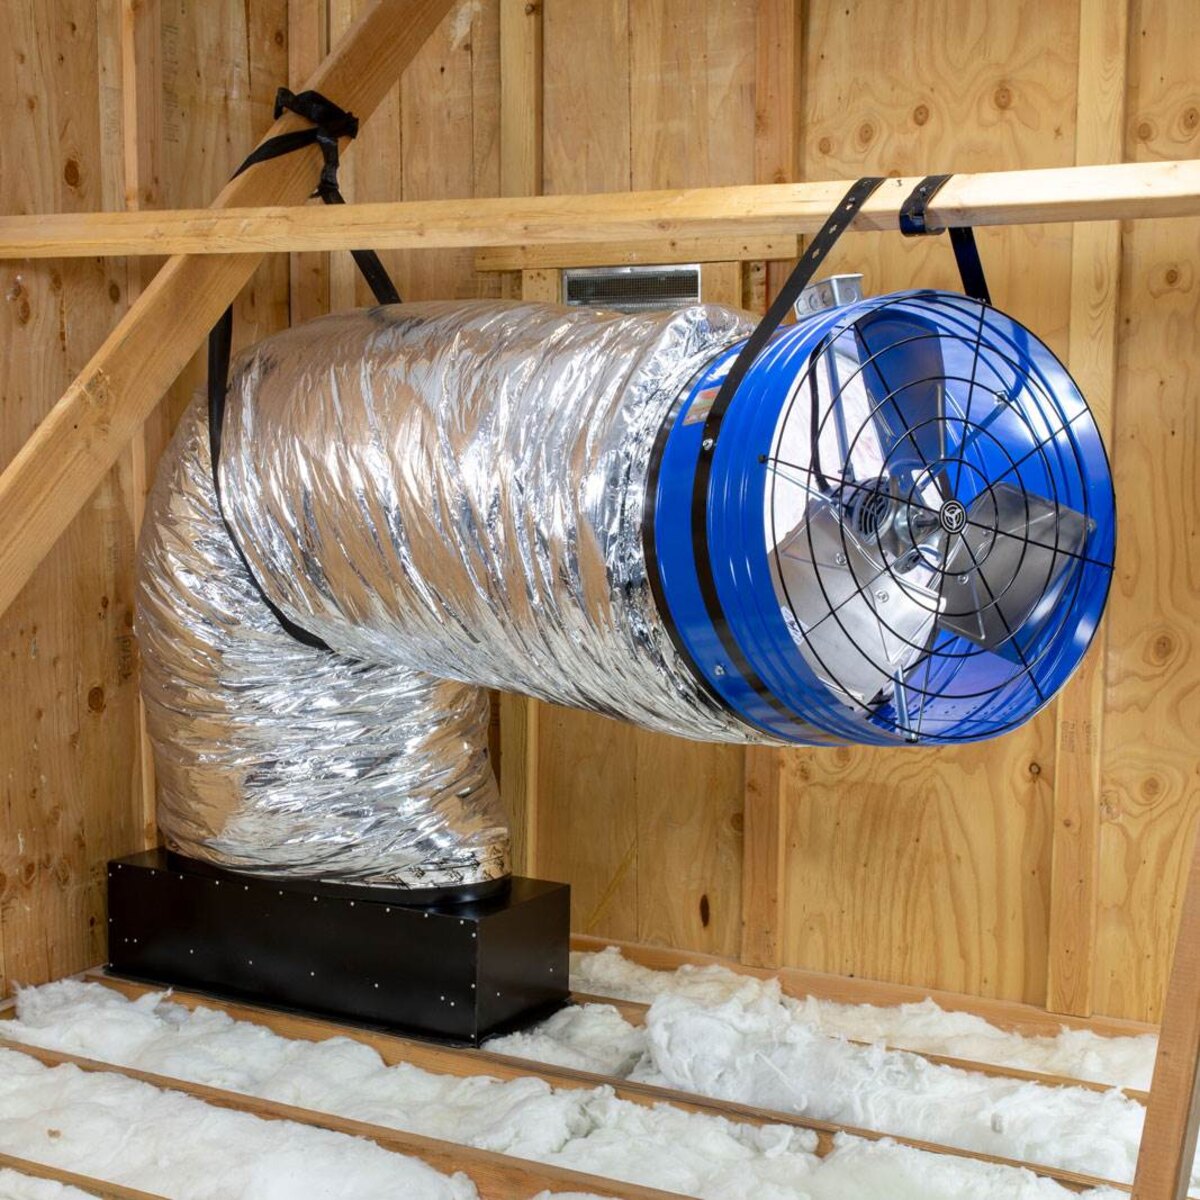 How To Install An Attic Exhaust Fan